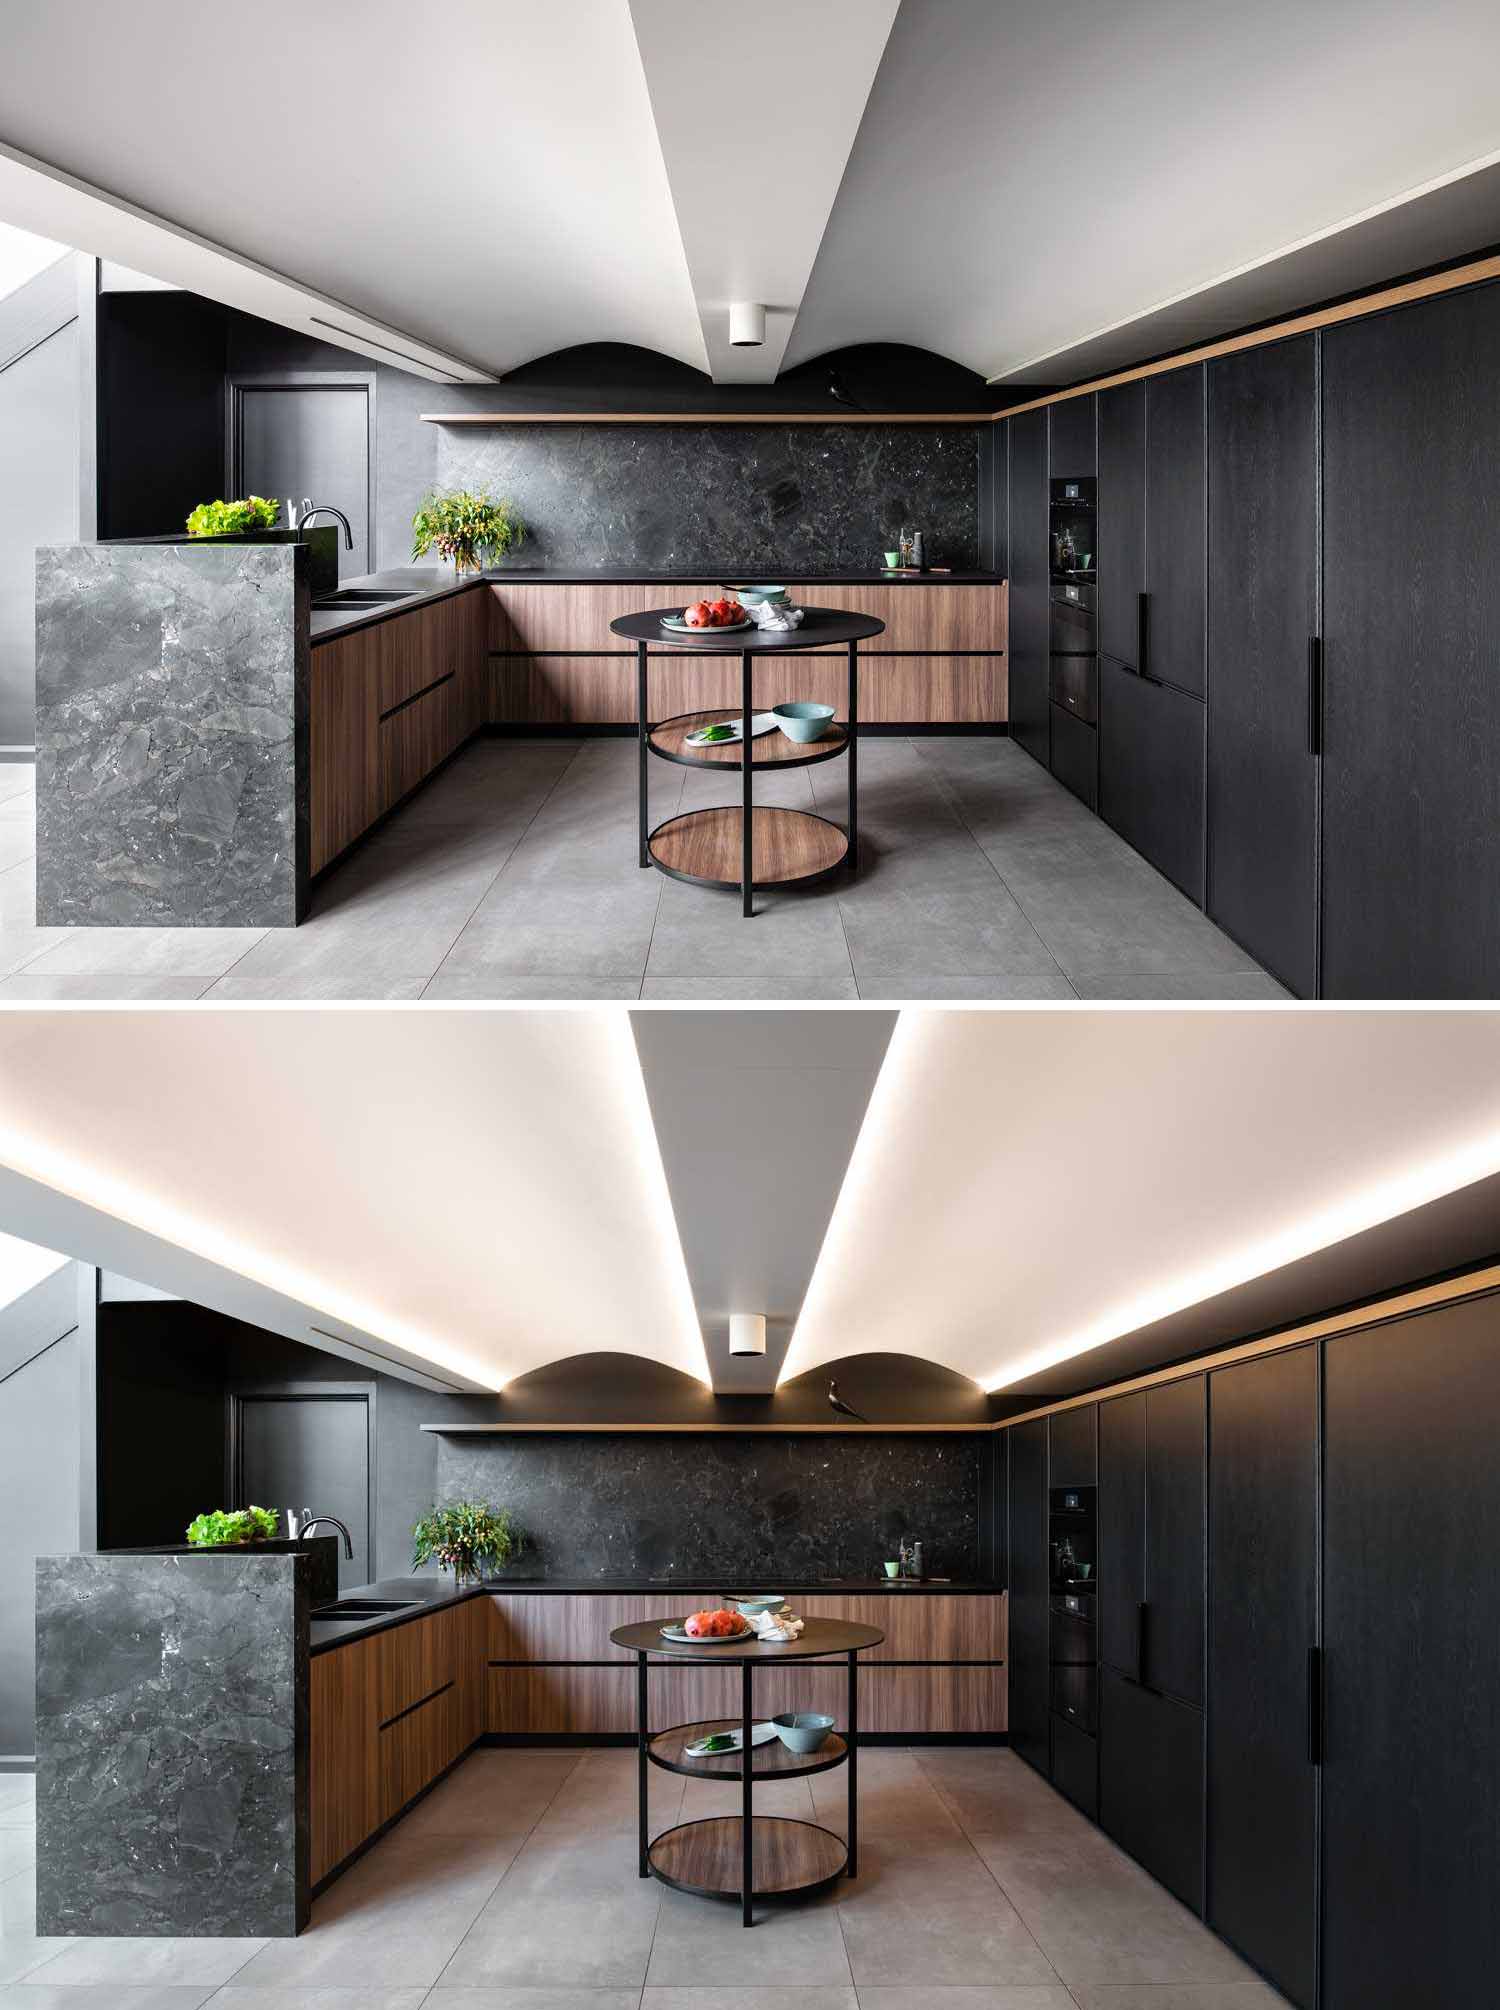 Plywood arches with LED lighting were added between the ceiling beams to create a sense of height in this renovated modern kitchen.